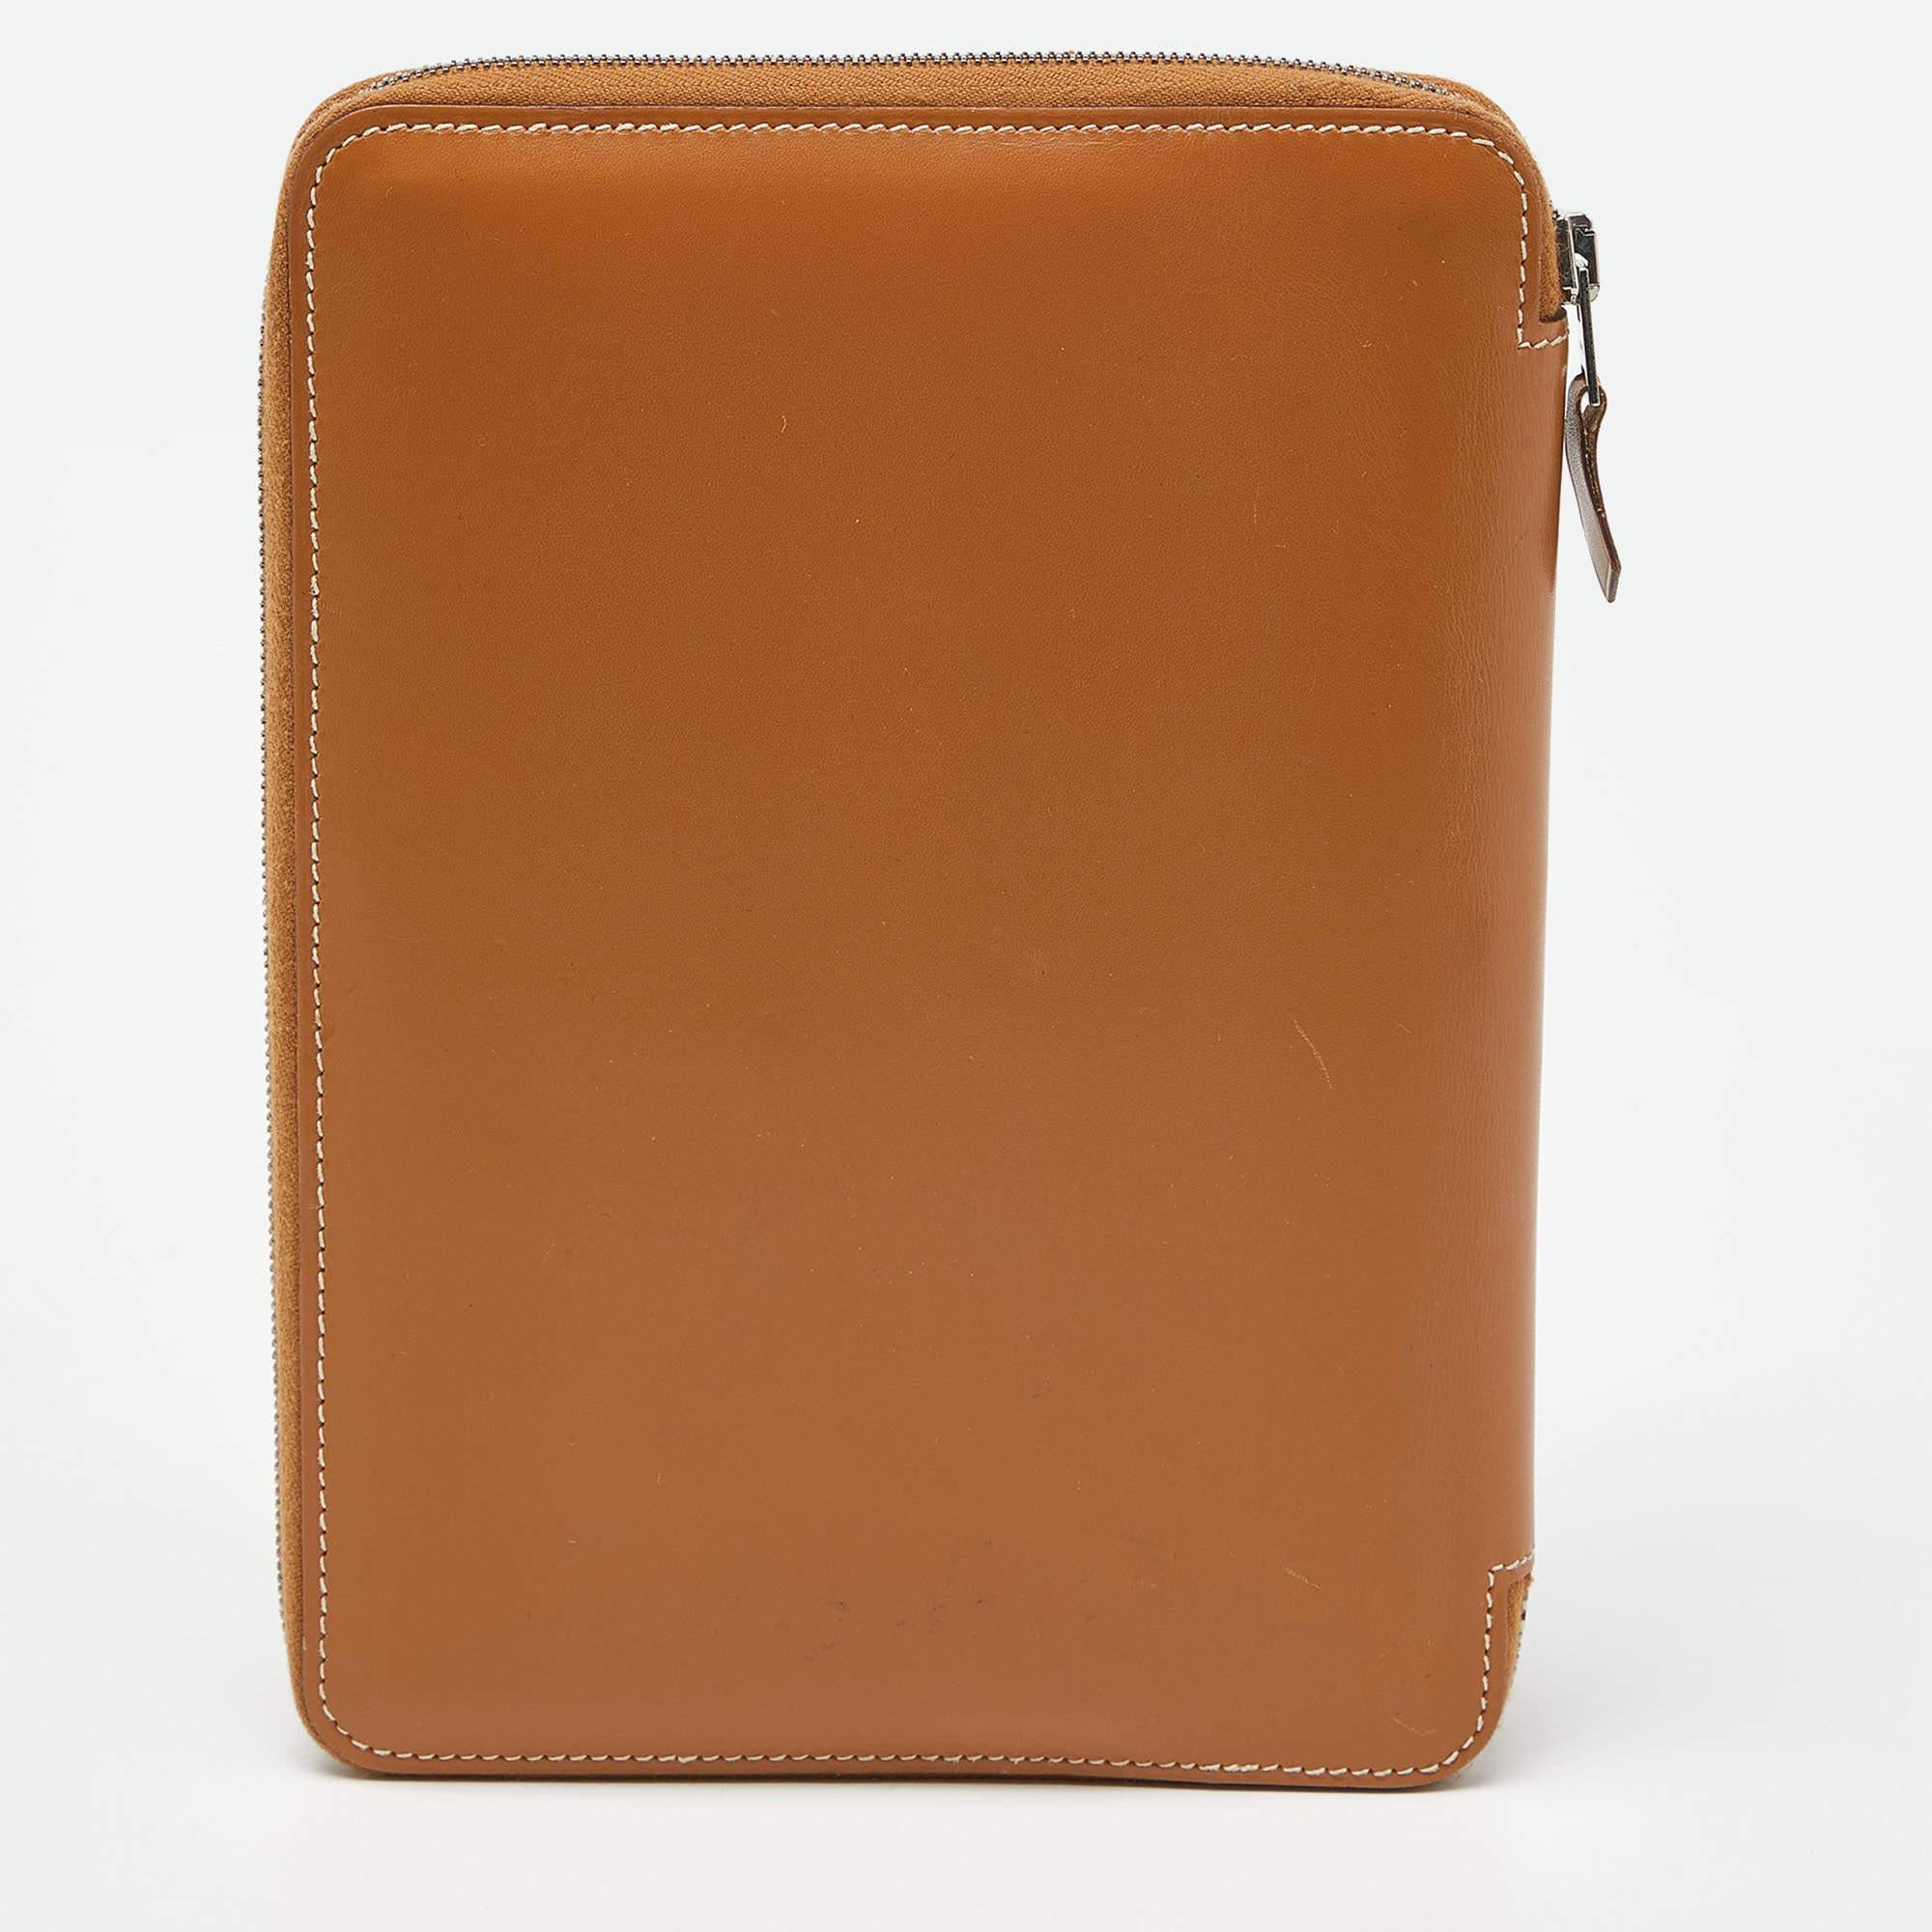 Write a lot and keep your words tucked away safely with this globe trotter agenda from the house of Hermés. Crafted from Tabac Camel Swift leather, it has contrast stitching and a zip closure with a notebook inside. It's the perfect companion for